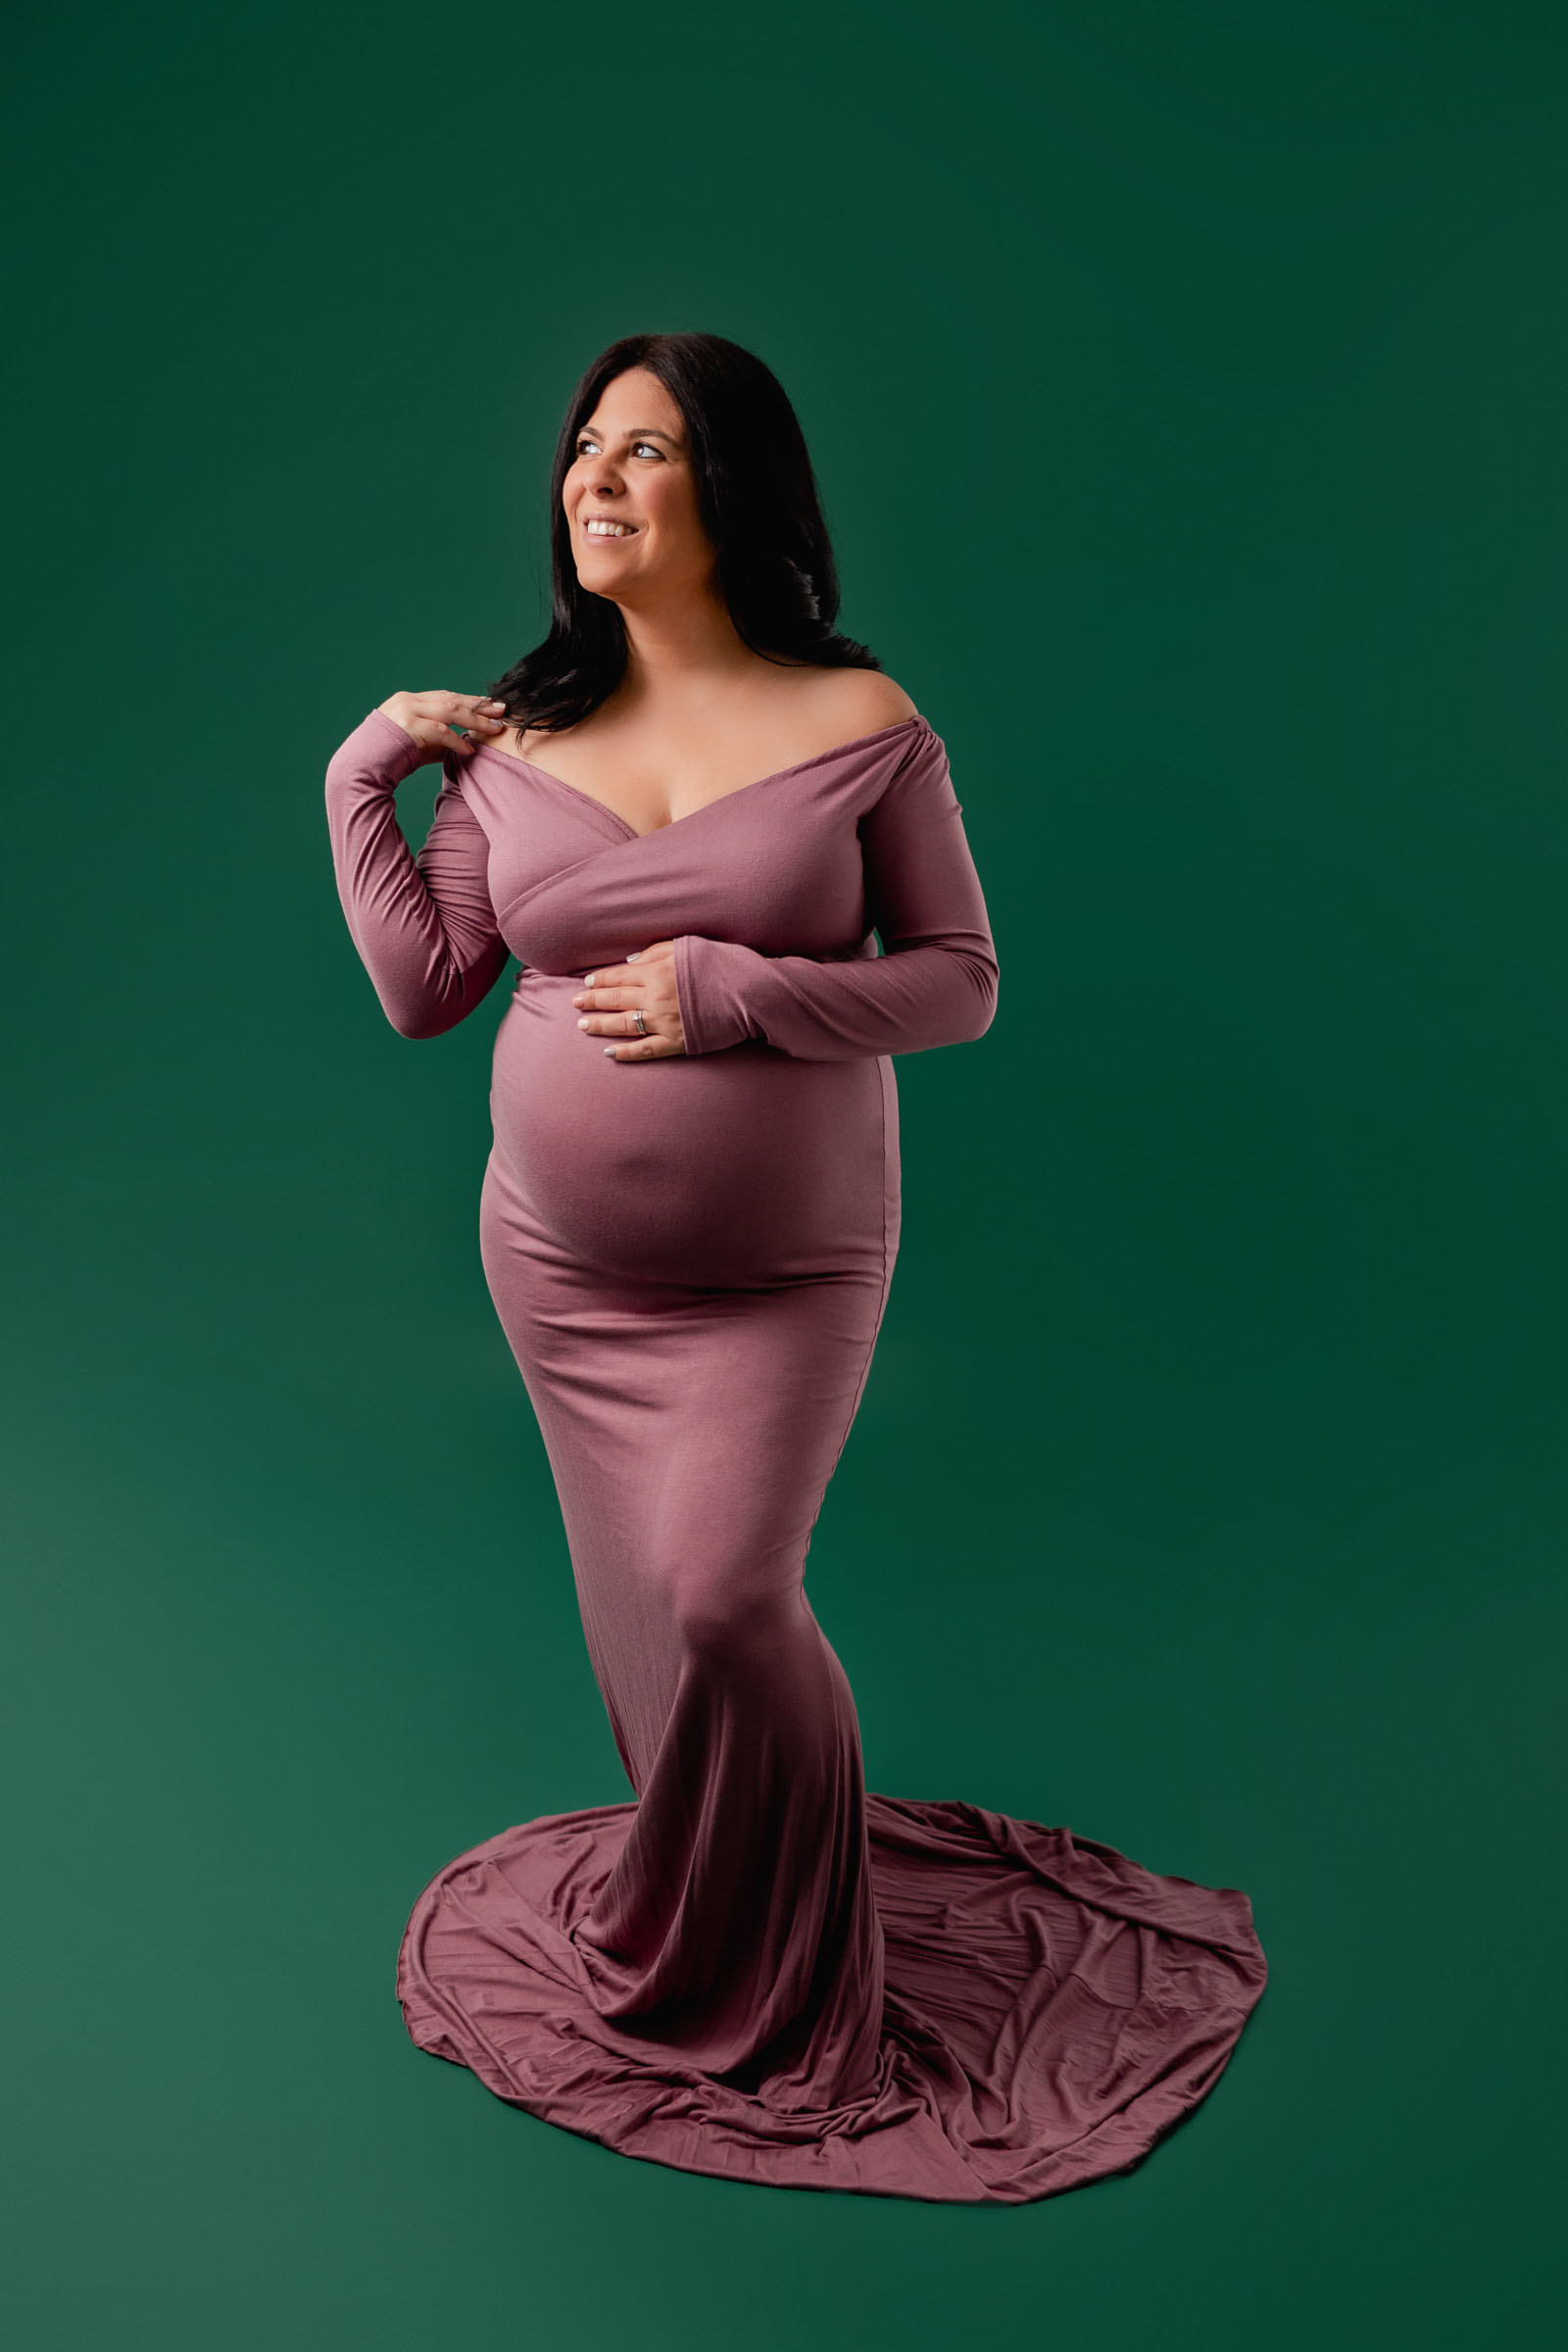 Pregnant mom in pink maternity dress on green backdrop